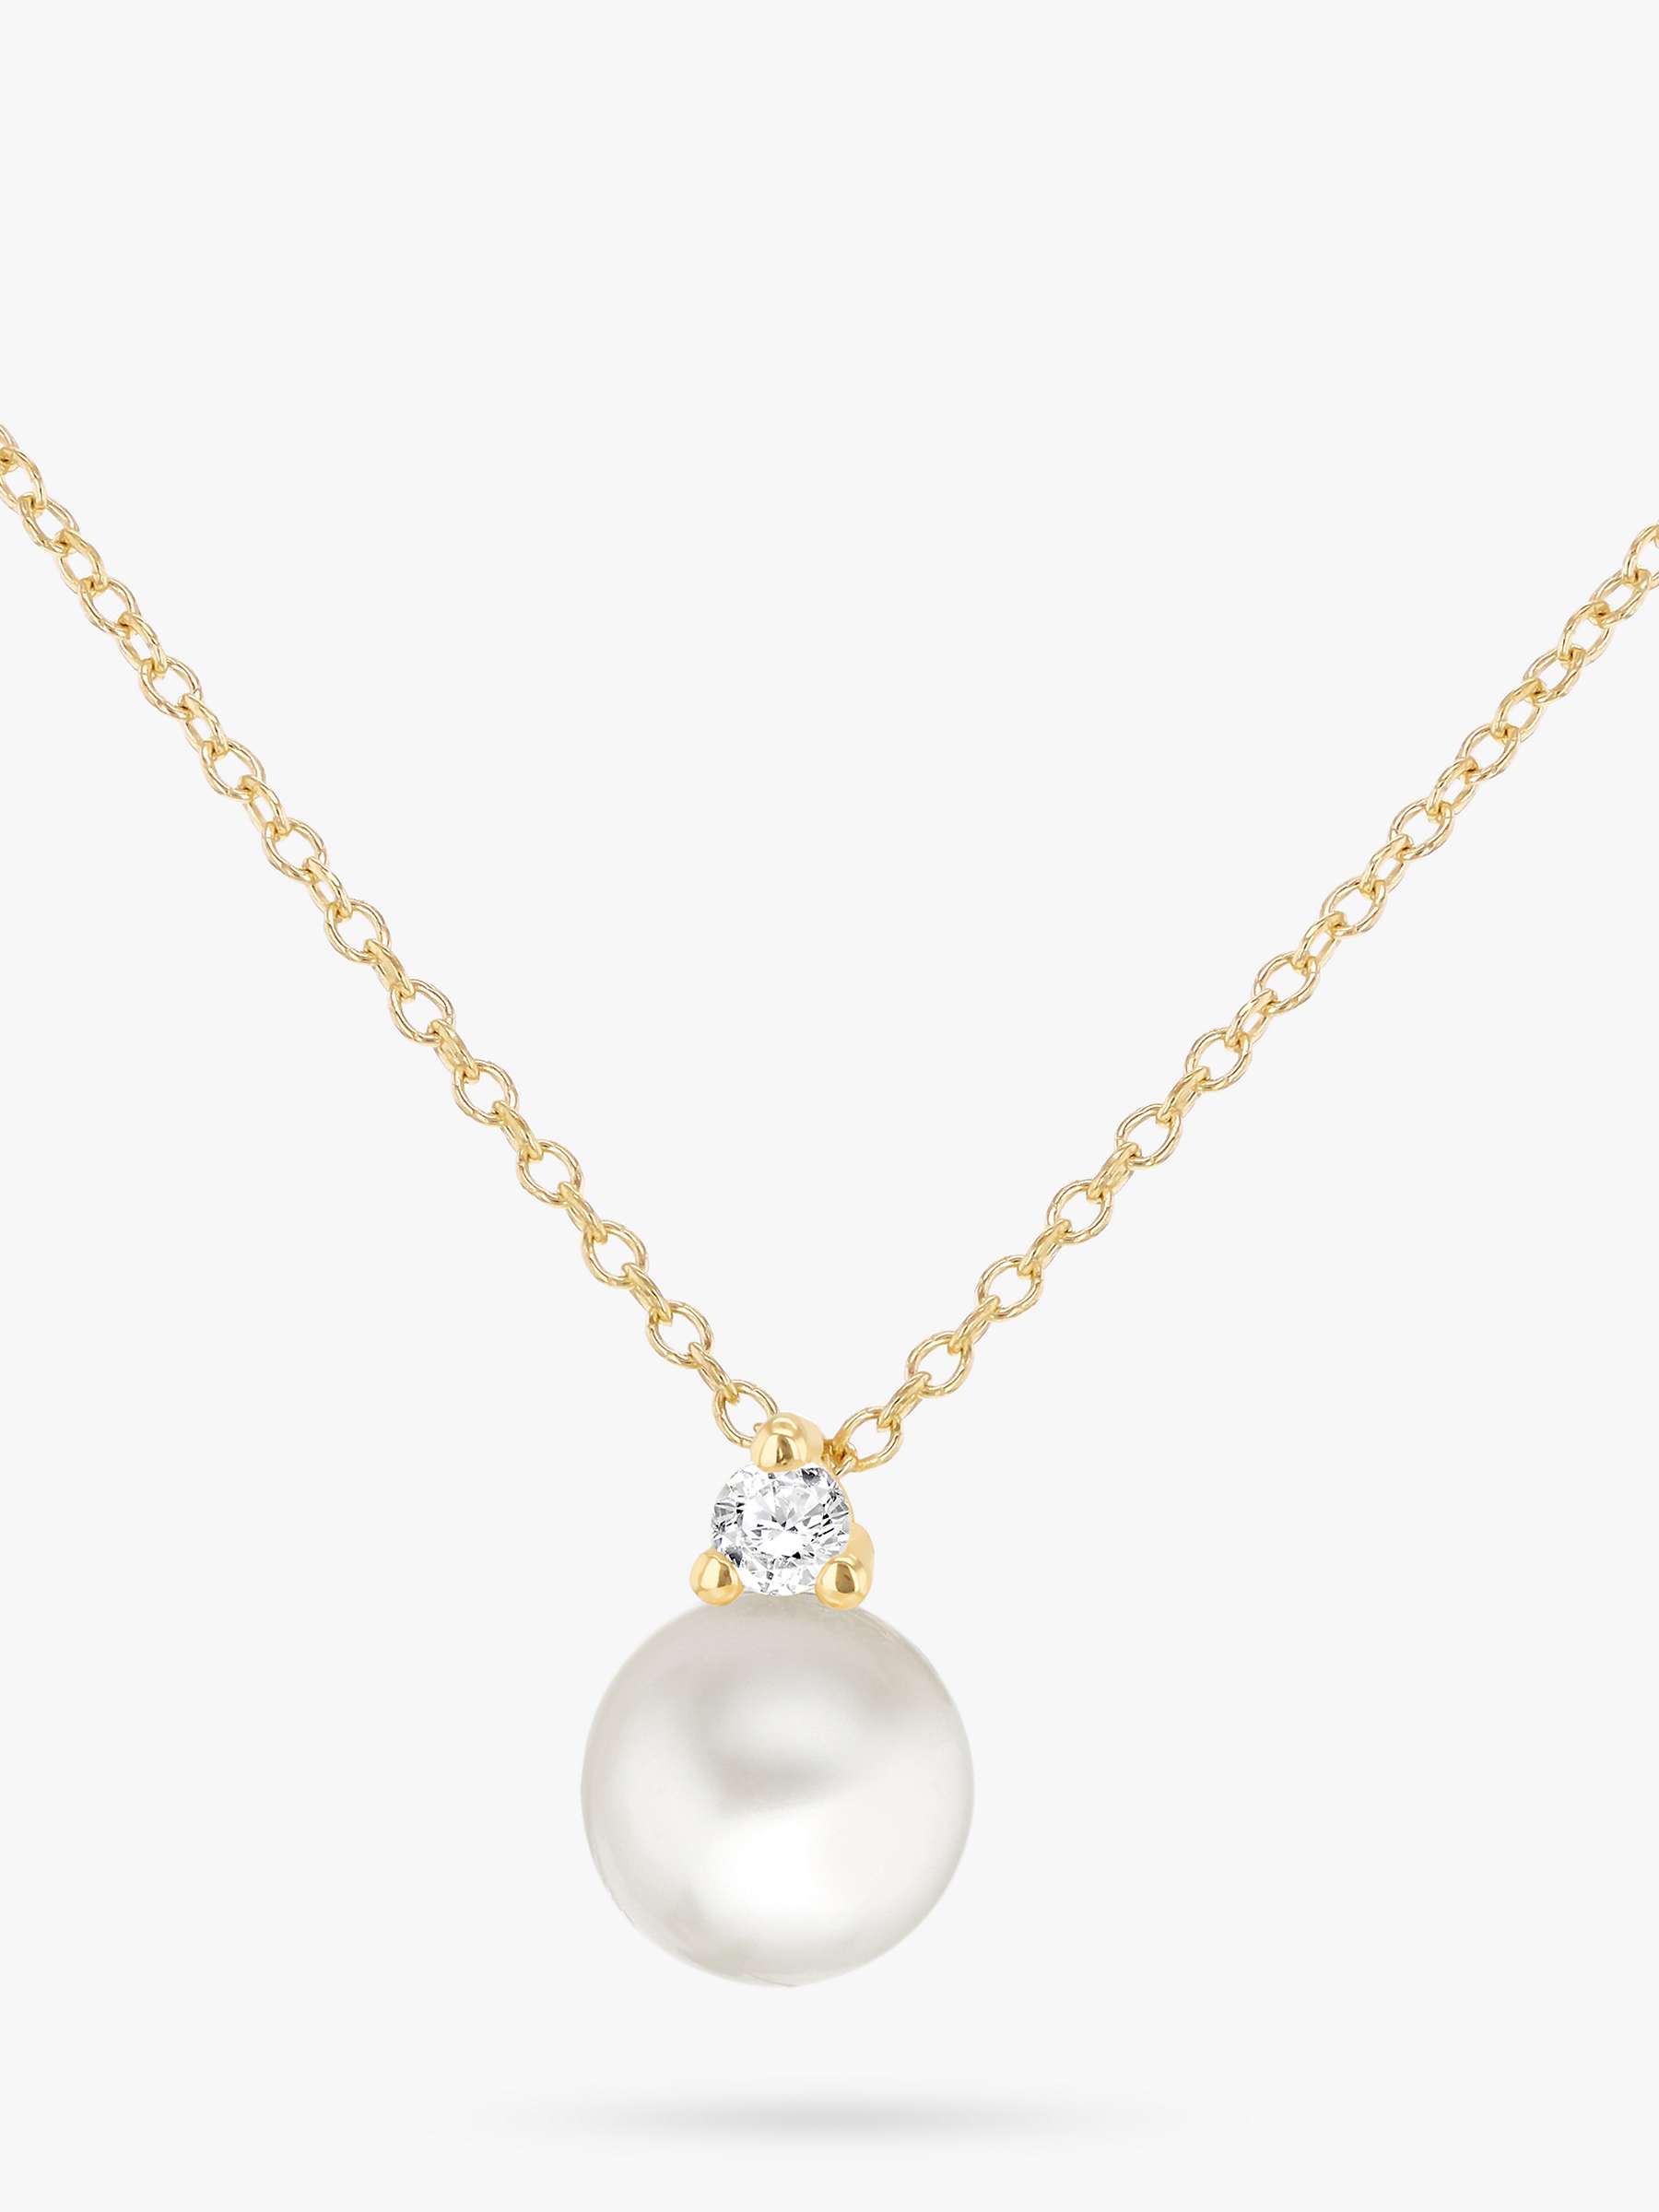 Buy IBB 9ct Gold Freshwater Pearl & Cubic Zirconia Pendant Necklace, Gold Online at johnlewis.com